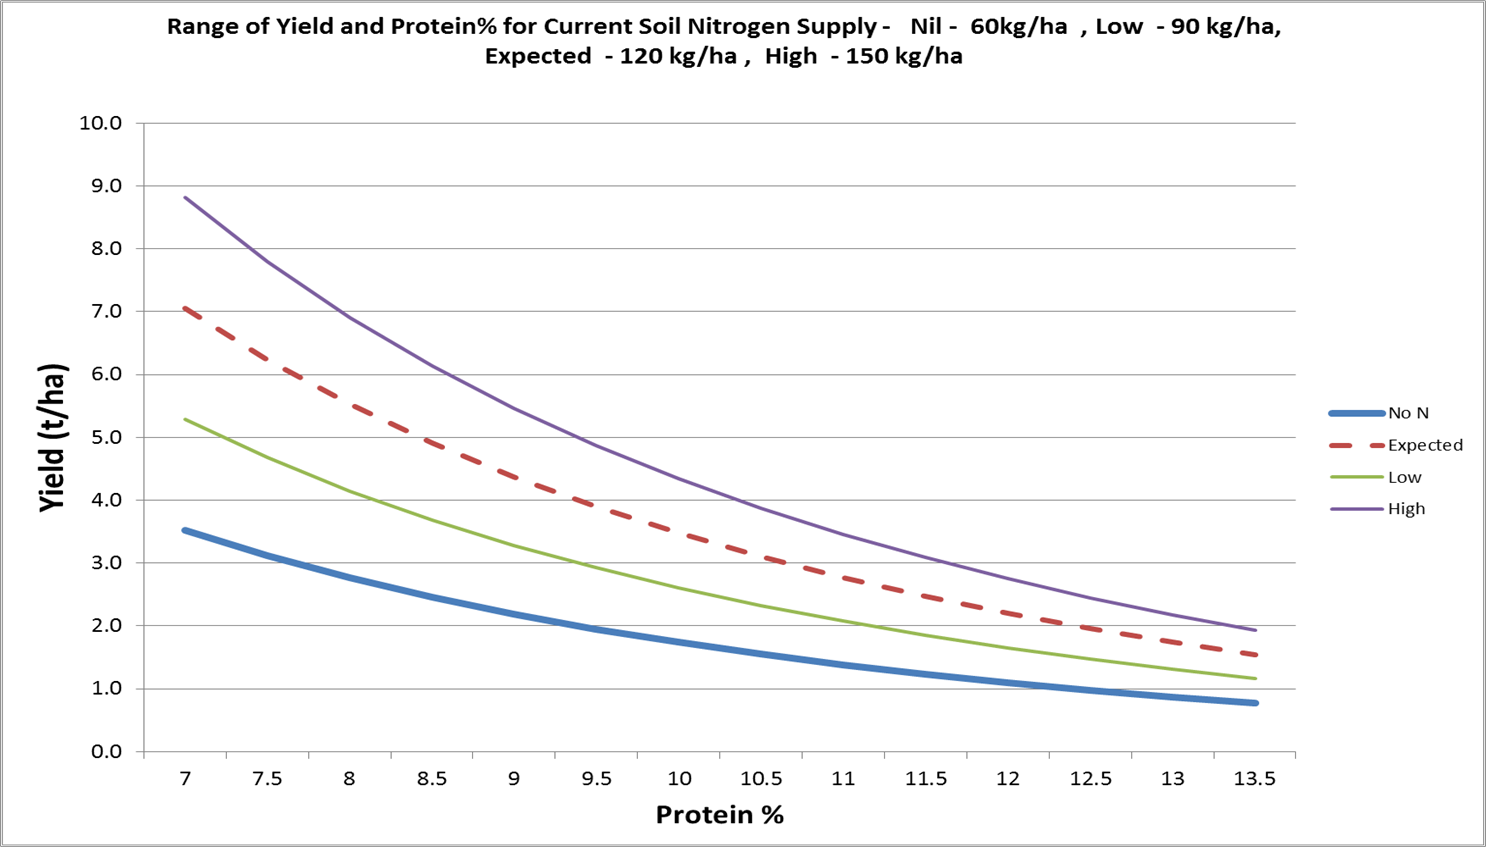 Line graph with title "Range of yield and protein % for current soil nitrogen supply - nil - 60kg/ha, Low - 90kg/ha, Expected - 120kg/ha, High - 150 kg/ha" showing yield (t/ha) vs. protein %